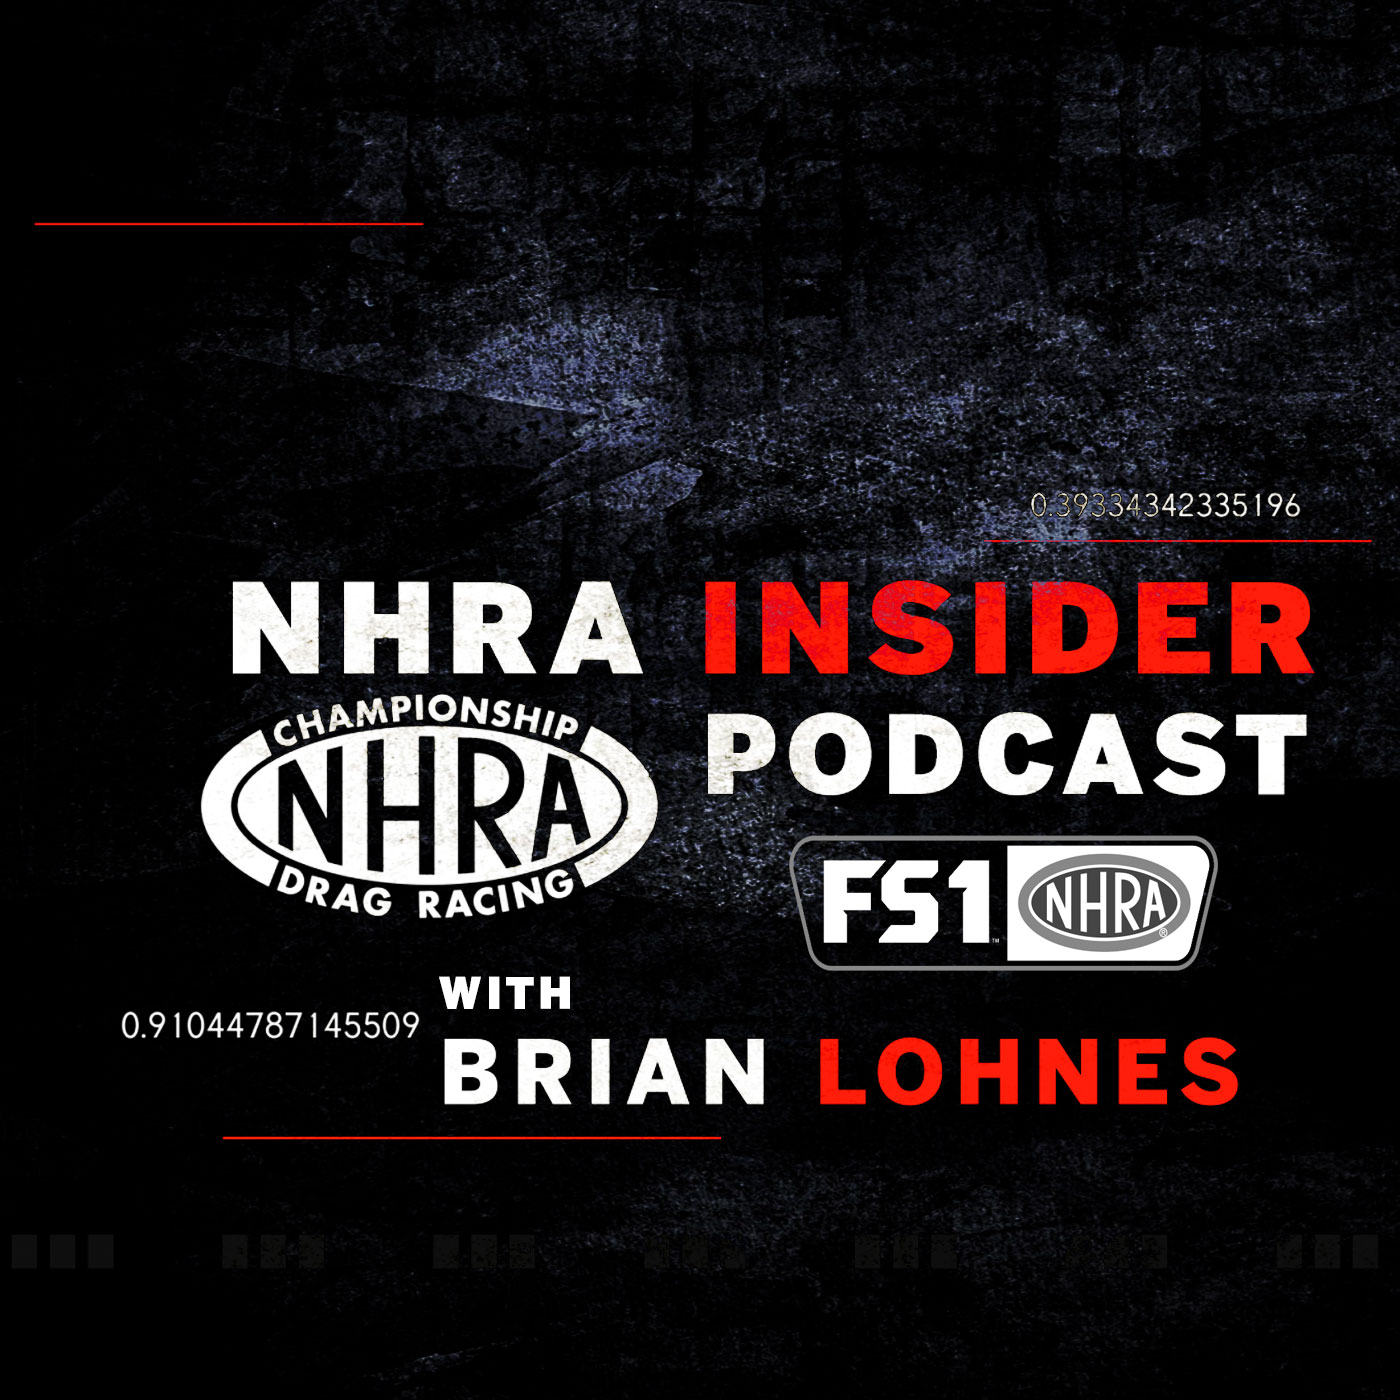 Listen Up: Conversations With Matt Smith and Justin Ashley On This Episode Of The NHRA Insider Podcast